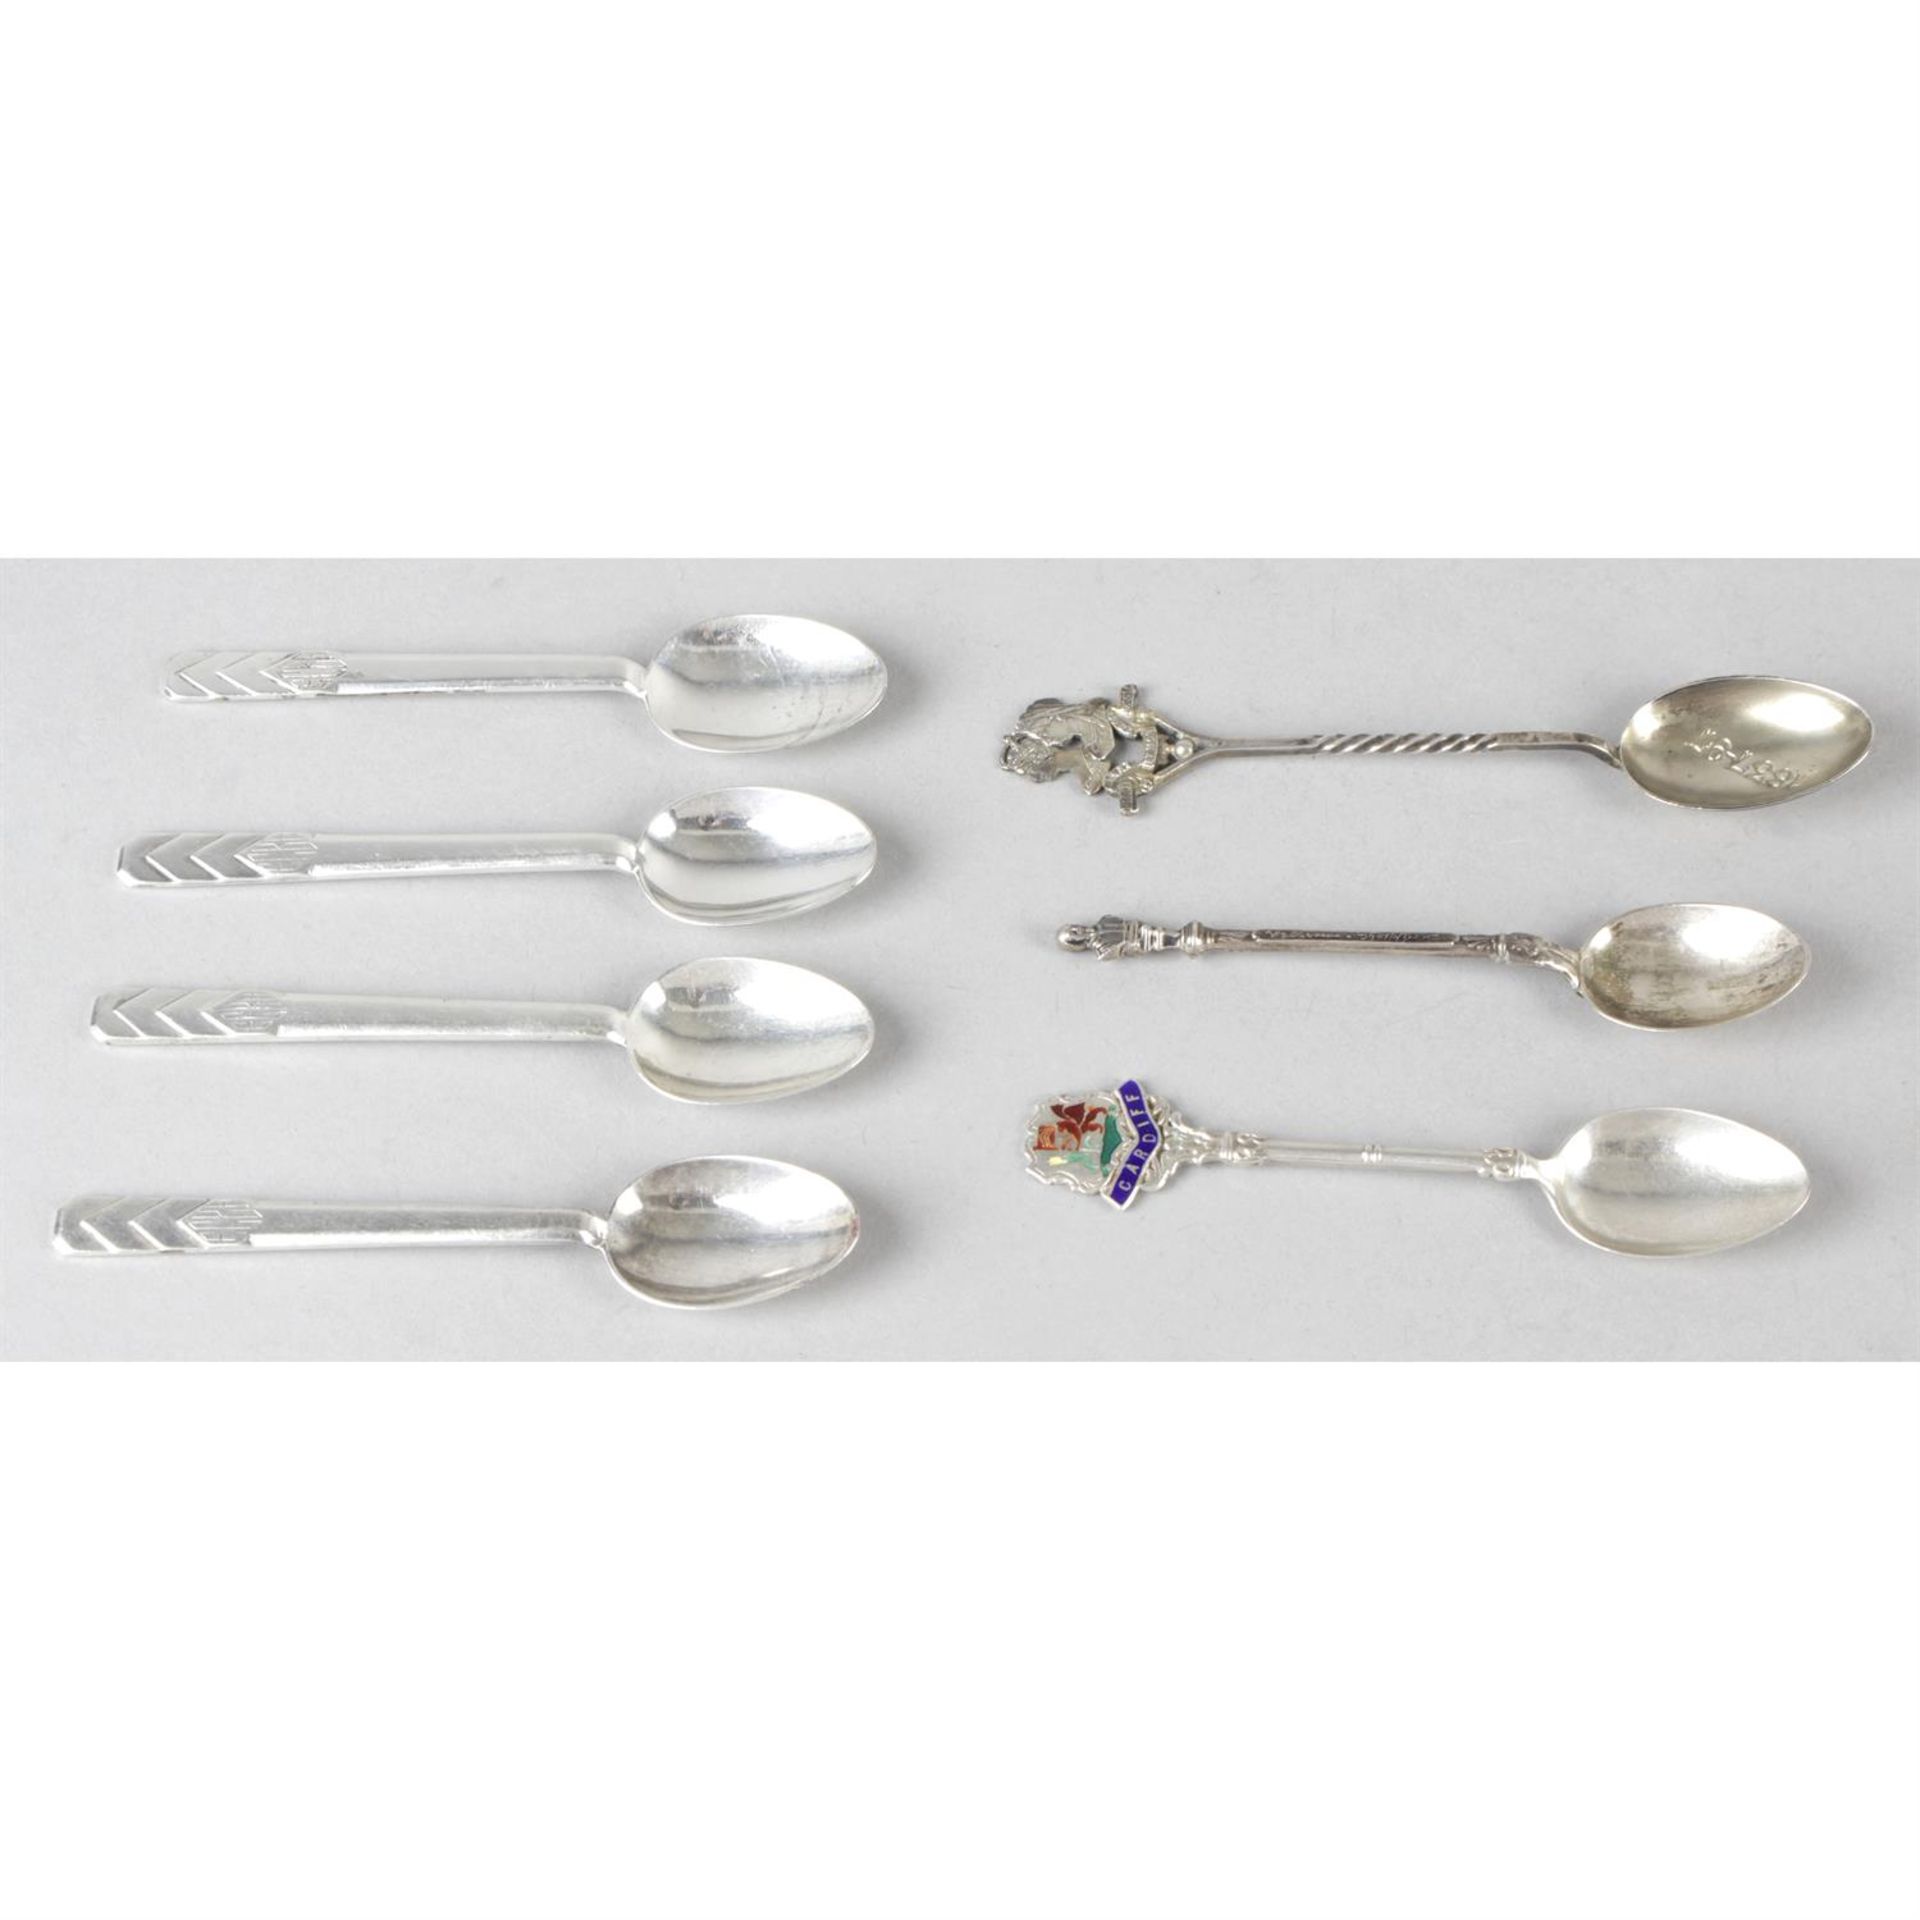 A selection of assorted spoons to include a reproduction Trefid spoon and Roman spoon, - Image 4 of 7